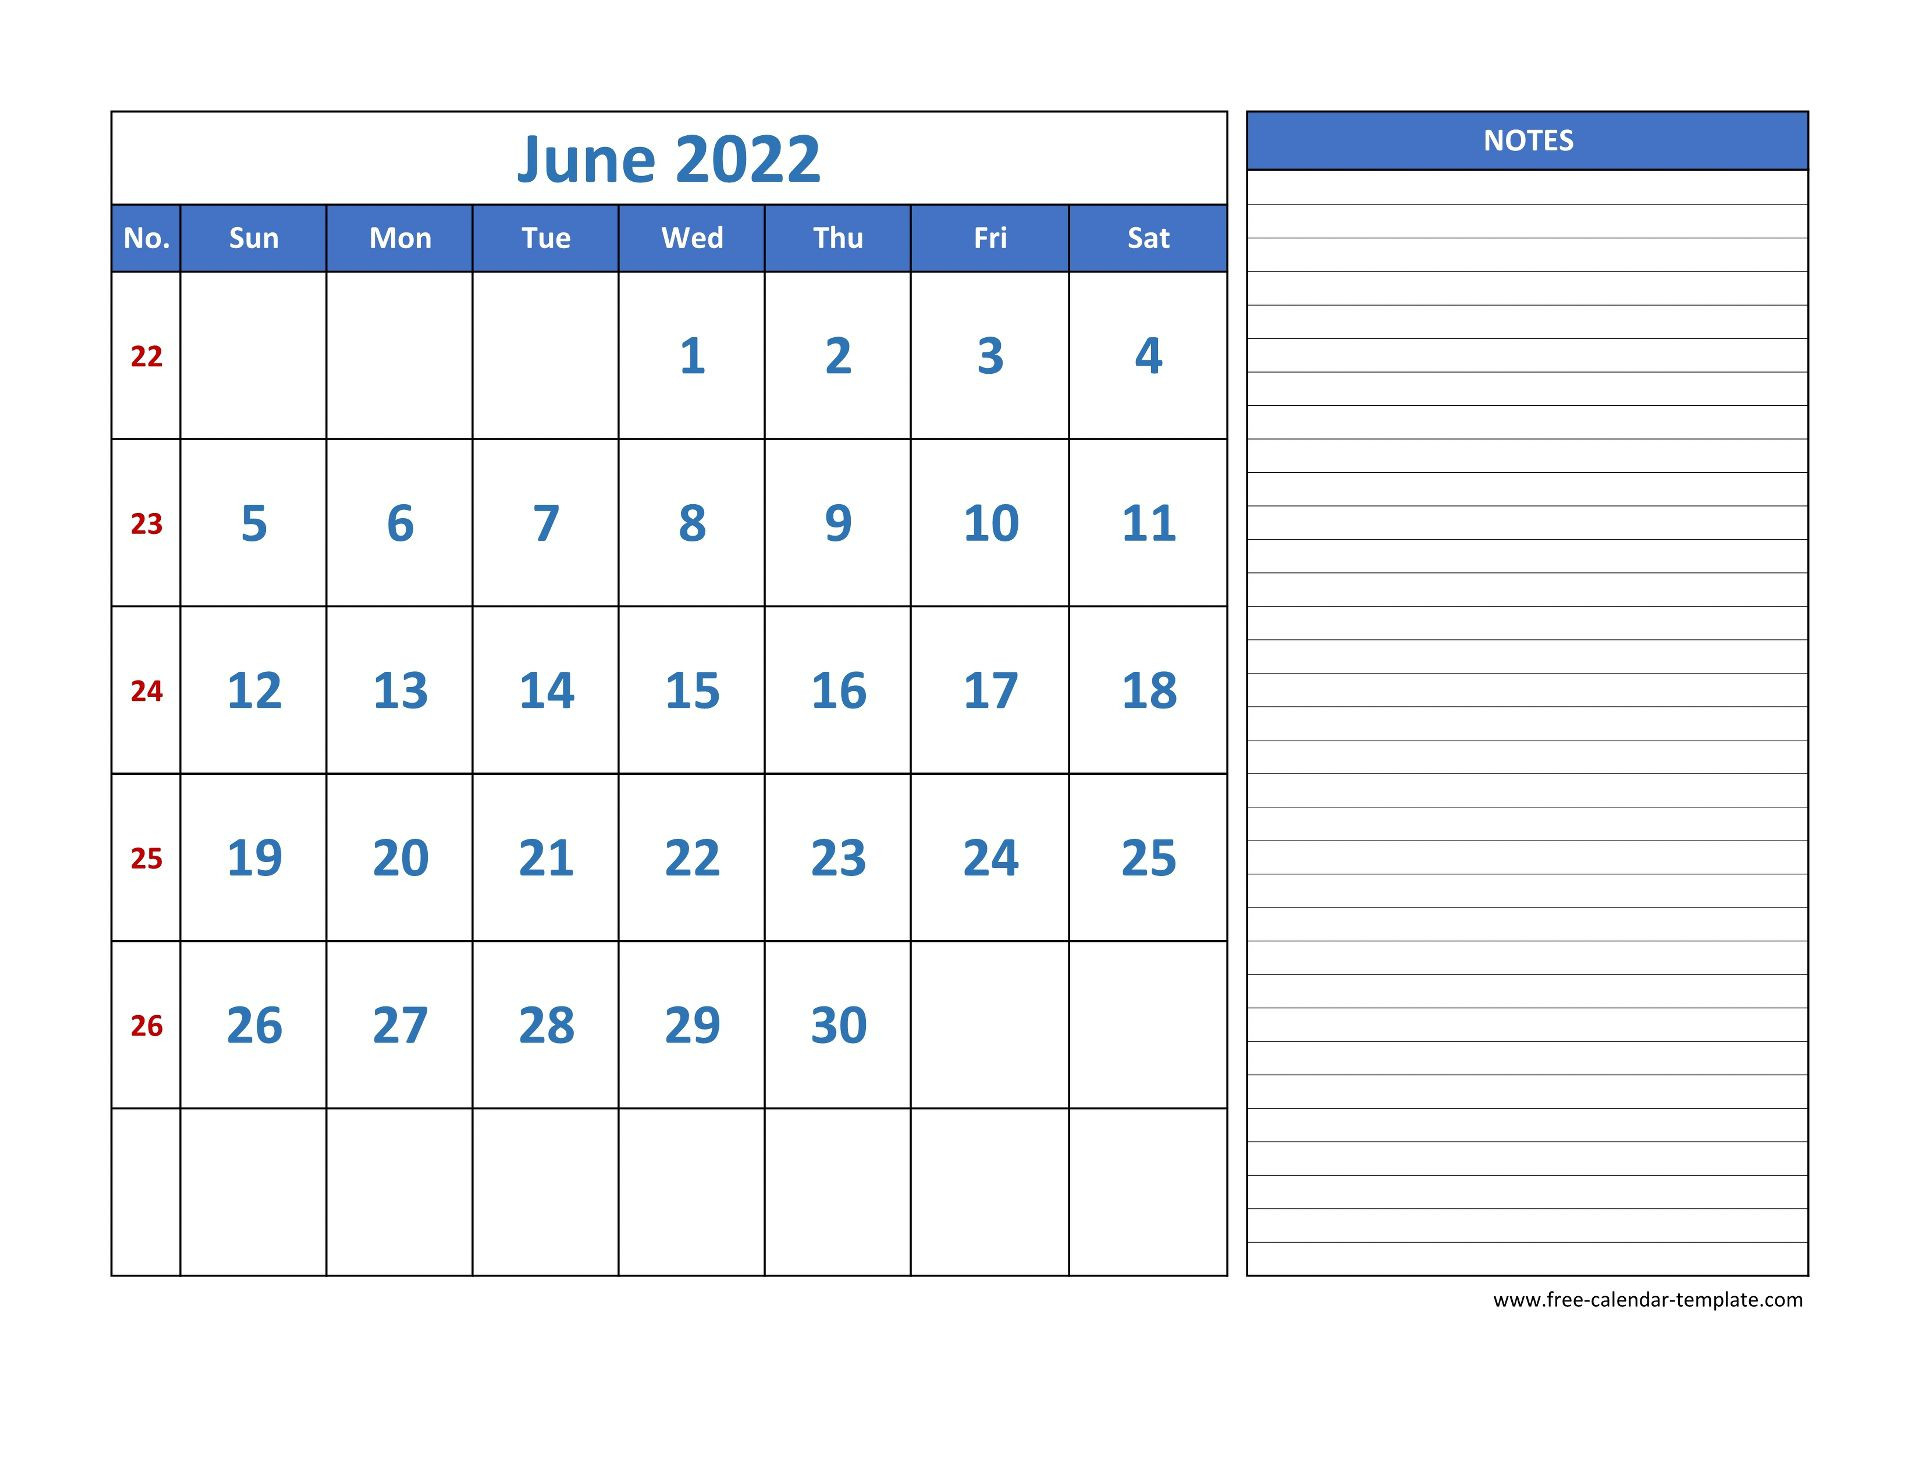 June Calendar 2022 Grid Lines For Holidays And Notes  Free Printable Calendar 2022 June